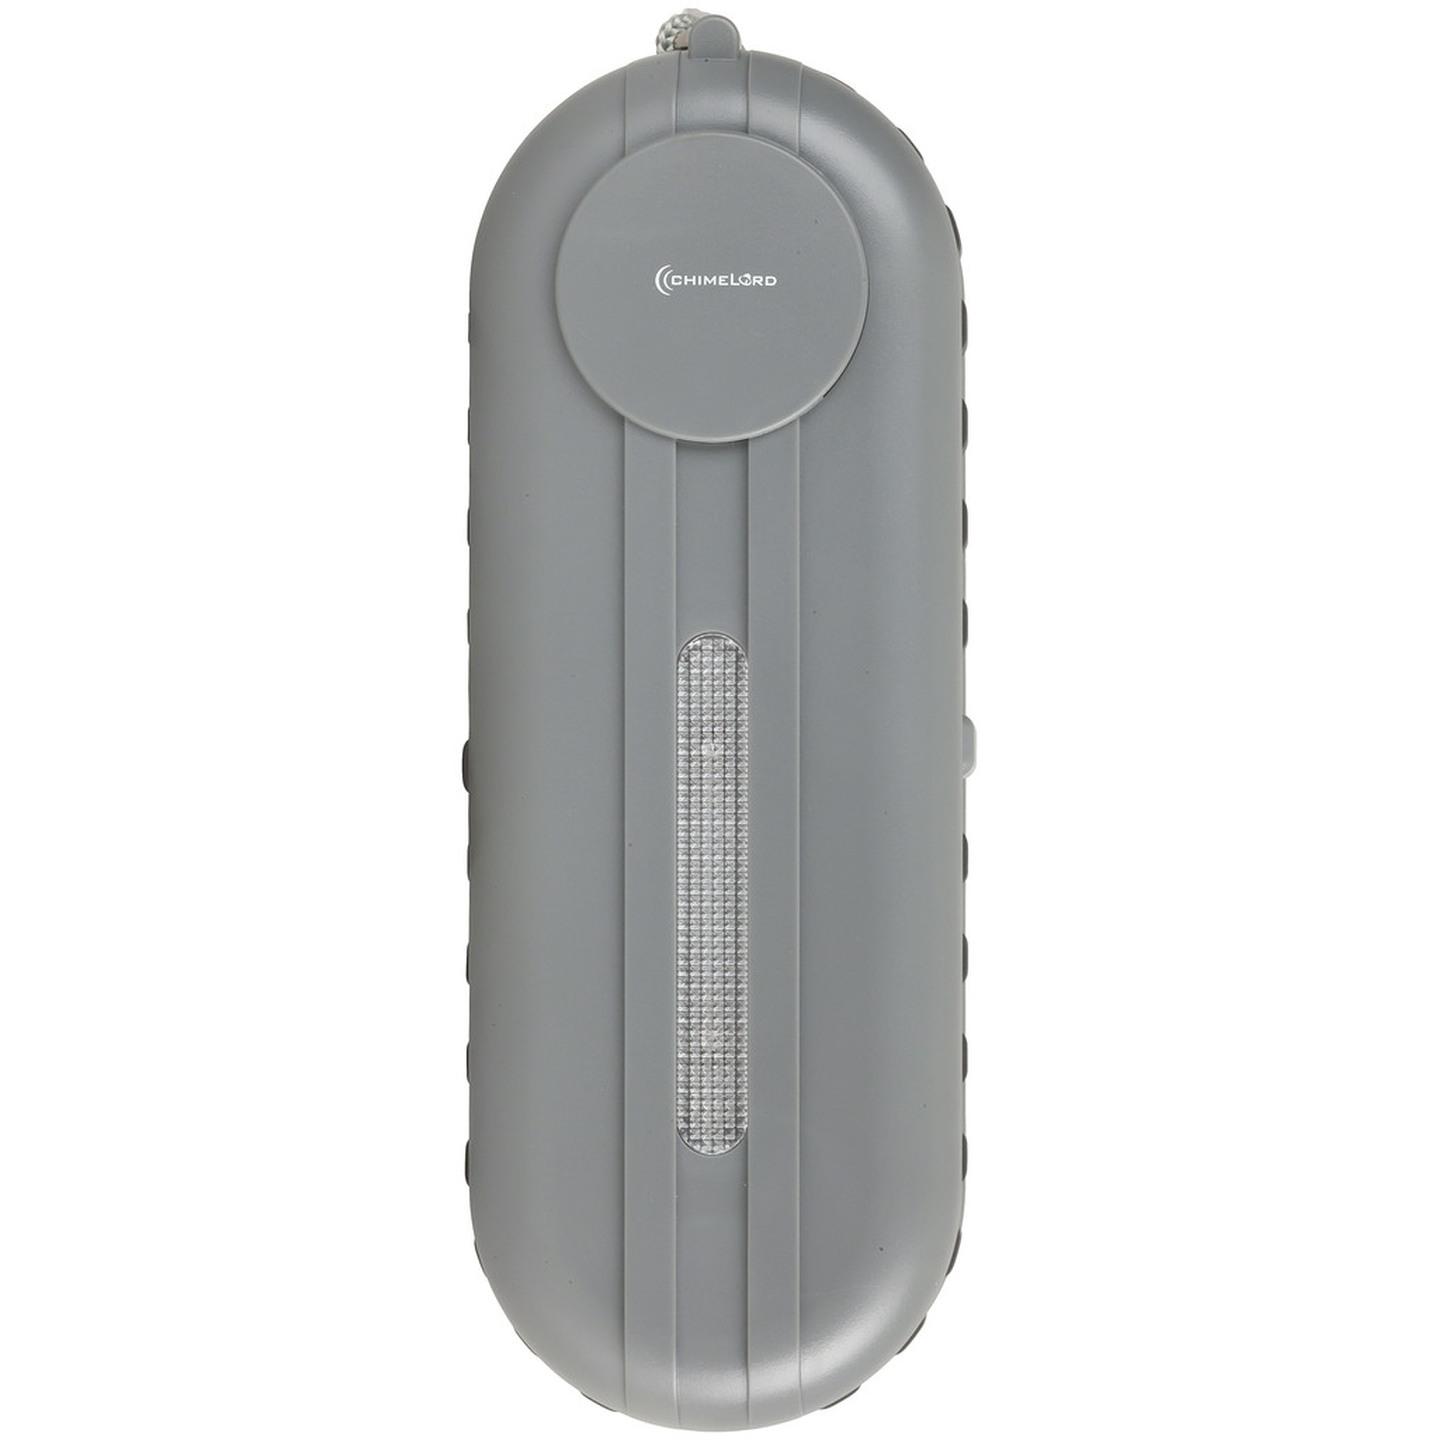 High Volume Wireless Door Bell with Strobe for the Hearing Impaired